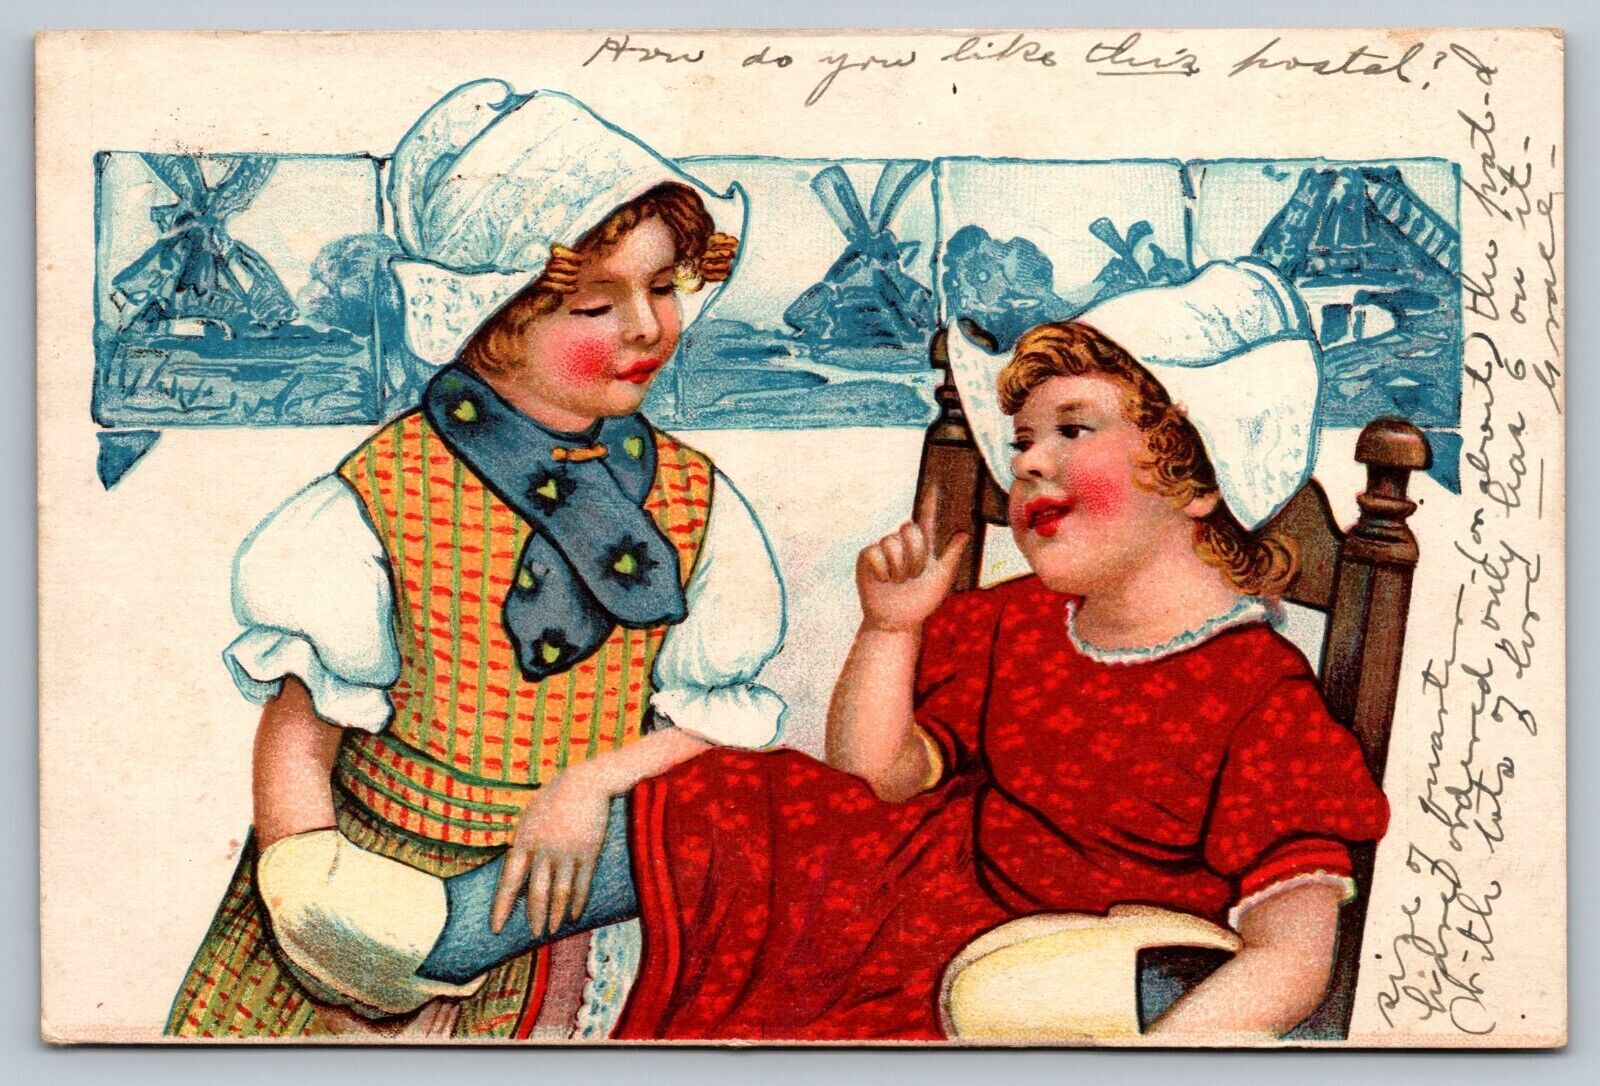 Postcard of Two Dutch Girls with Wooden Shoes Postly 